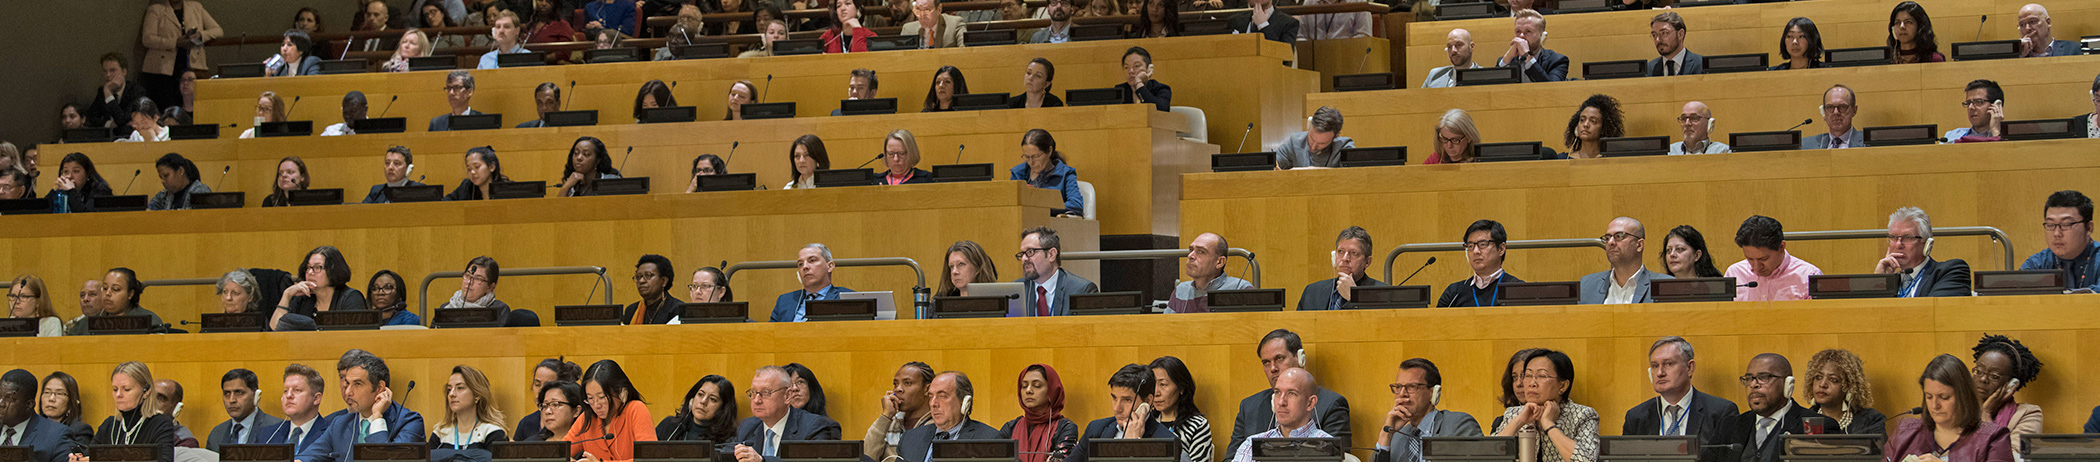 Photo of UN Staff Members at town hall meeting in New York.